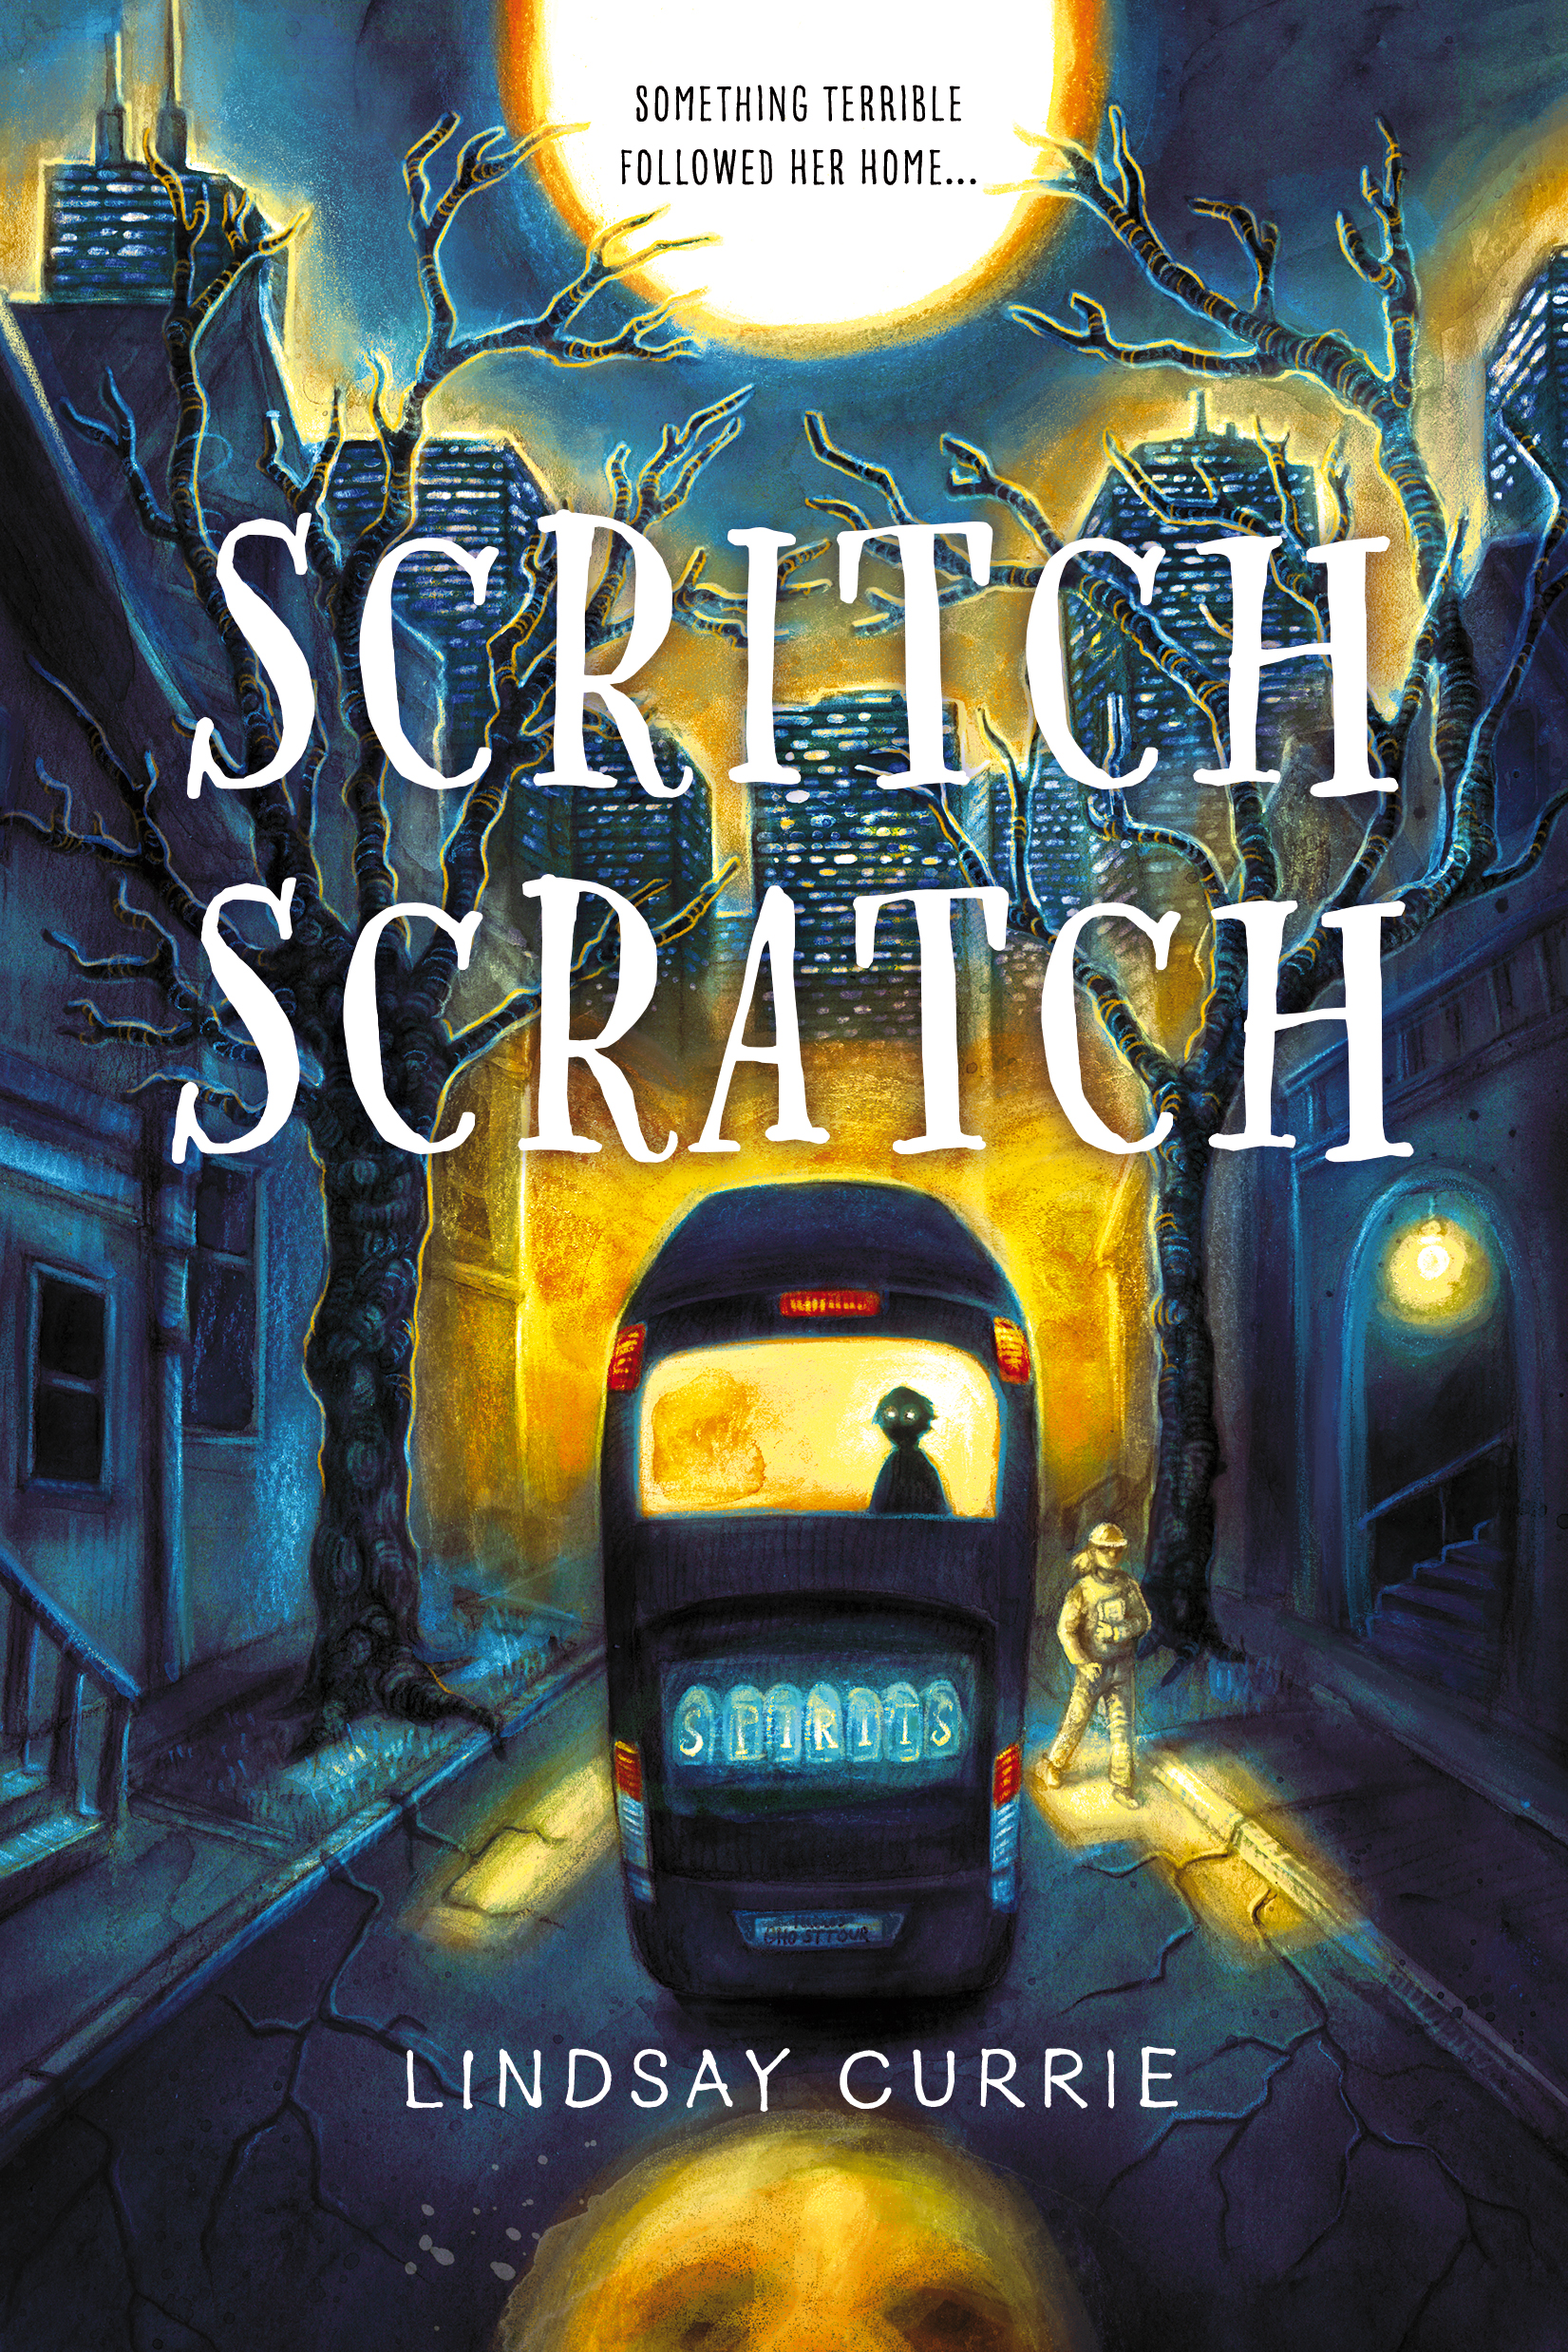 Scritch Scratch By Lindsay Currie Release Date? 2020 Children's Paranormal Fantasy Releases